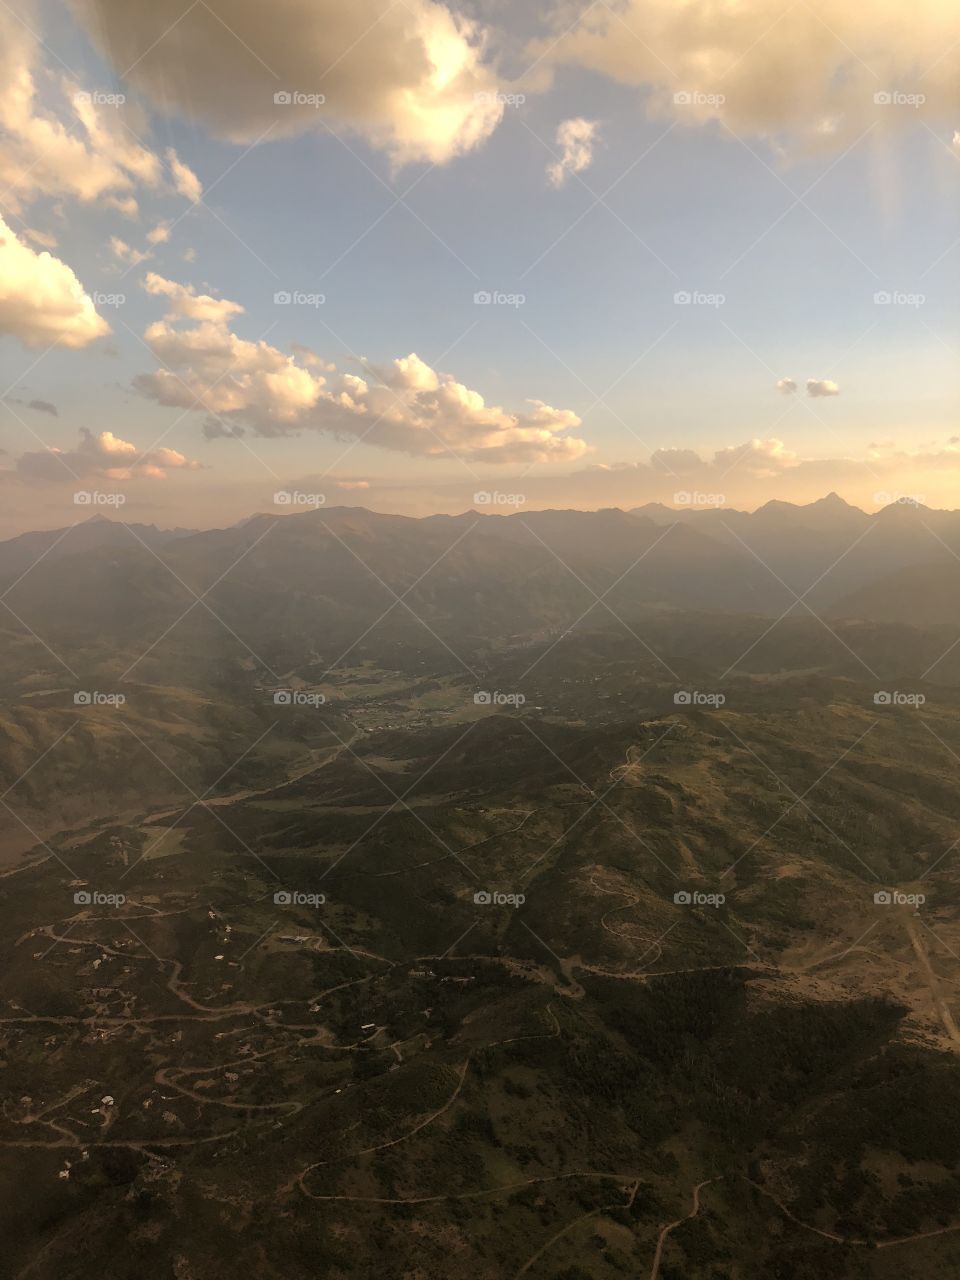 Sunset view of mountains from airplane 